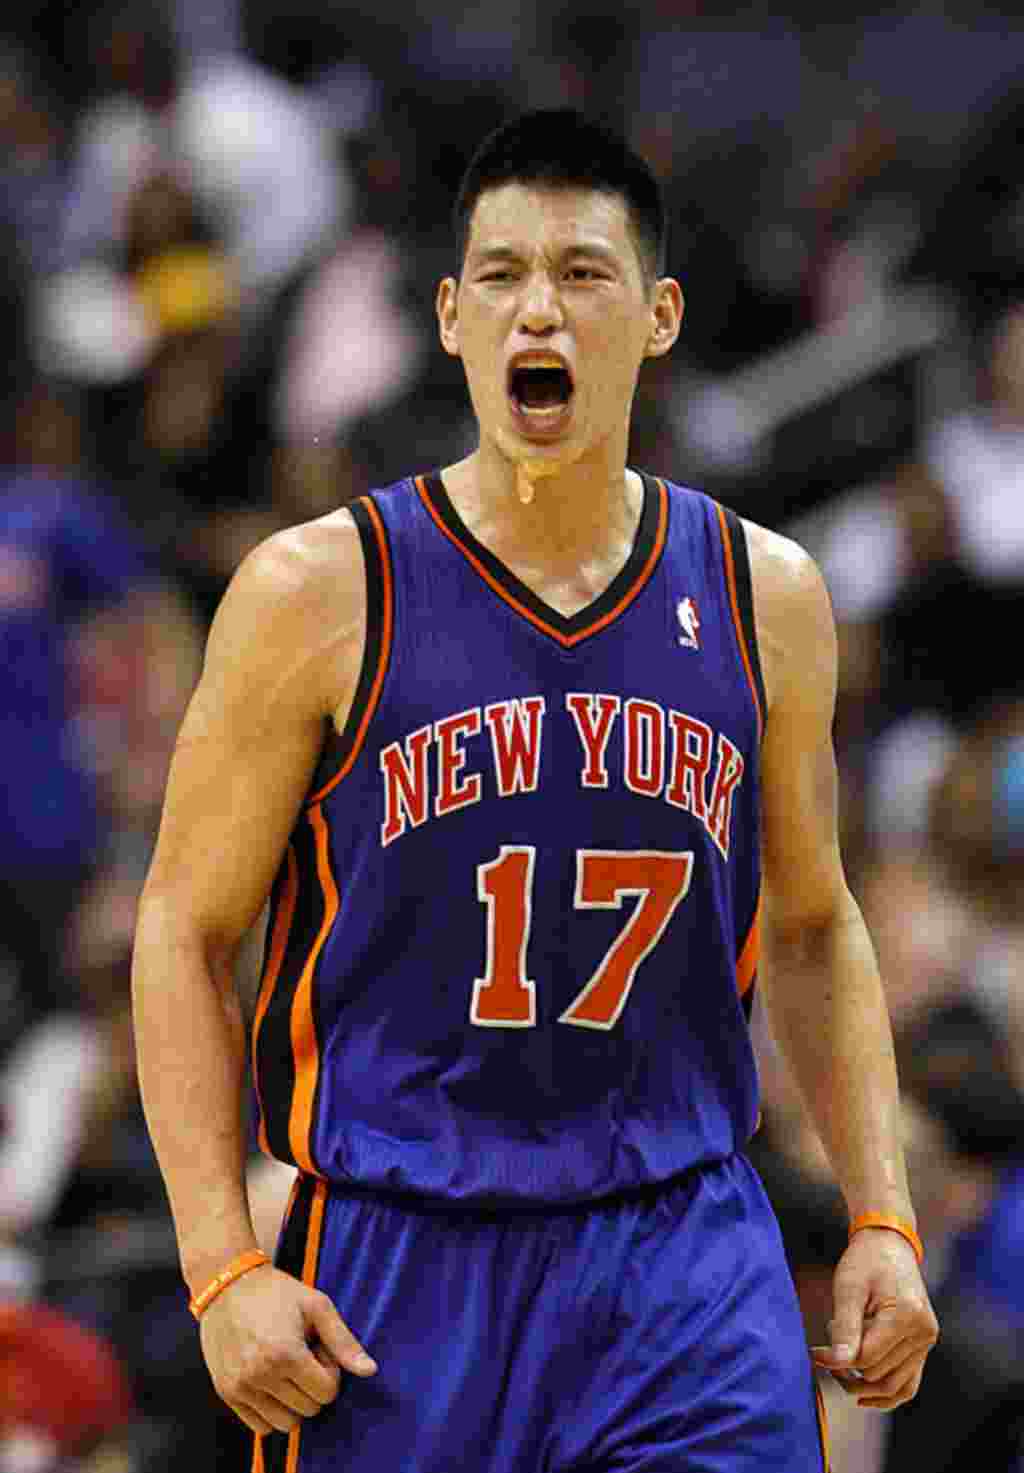 New York Knicks point guard Jeremy Lin celebrates his dunk during the second half of an NBA basketball game against the Washington Wizards, February 8, 2012, in Washington. The Knicks won 107-93. (AP)